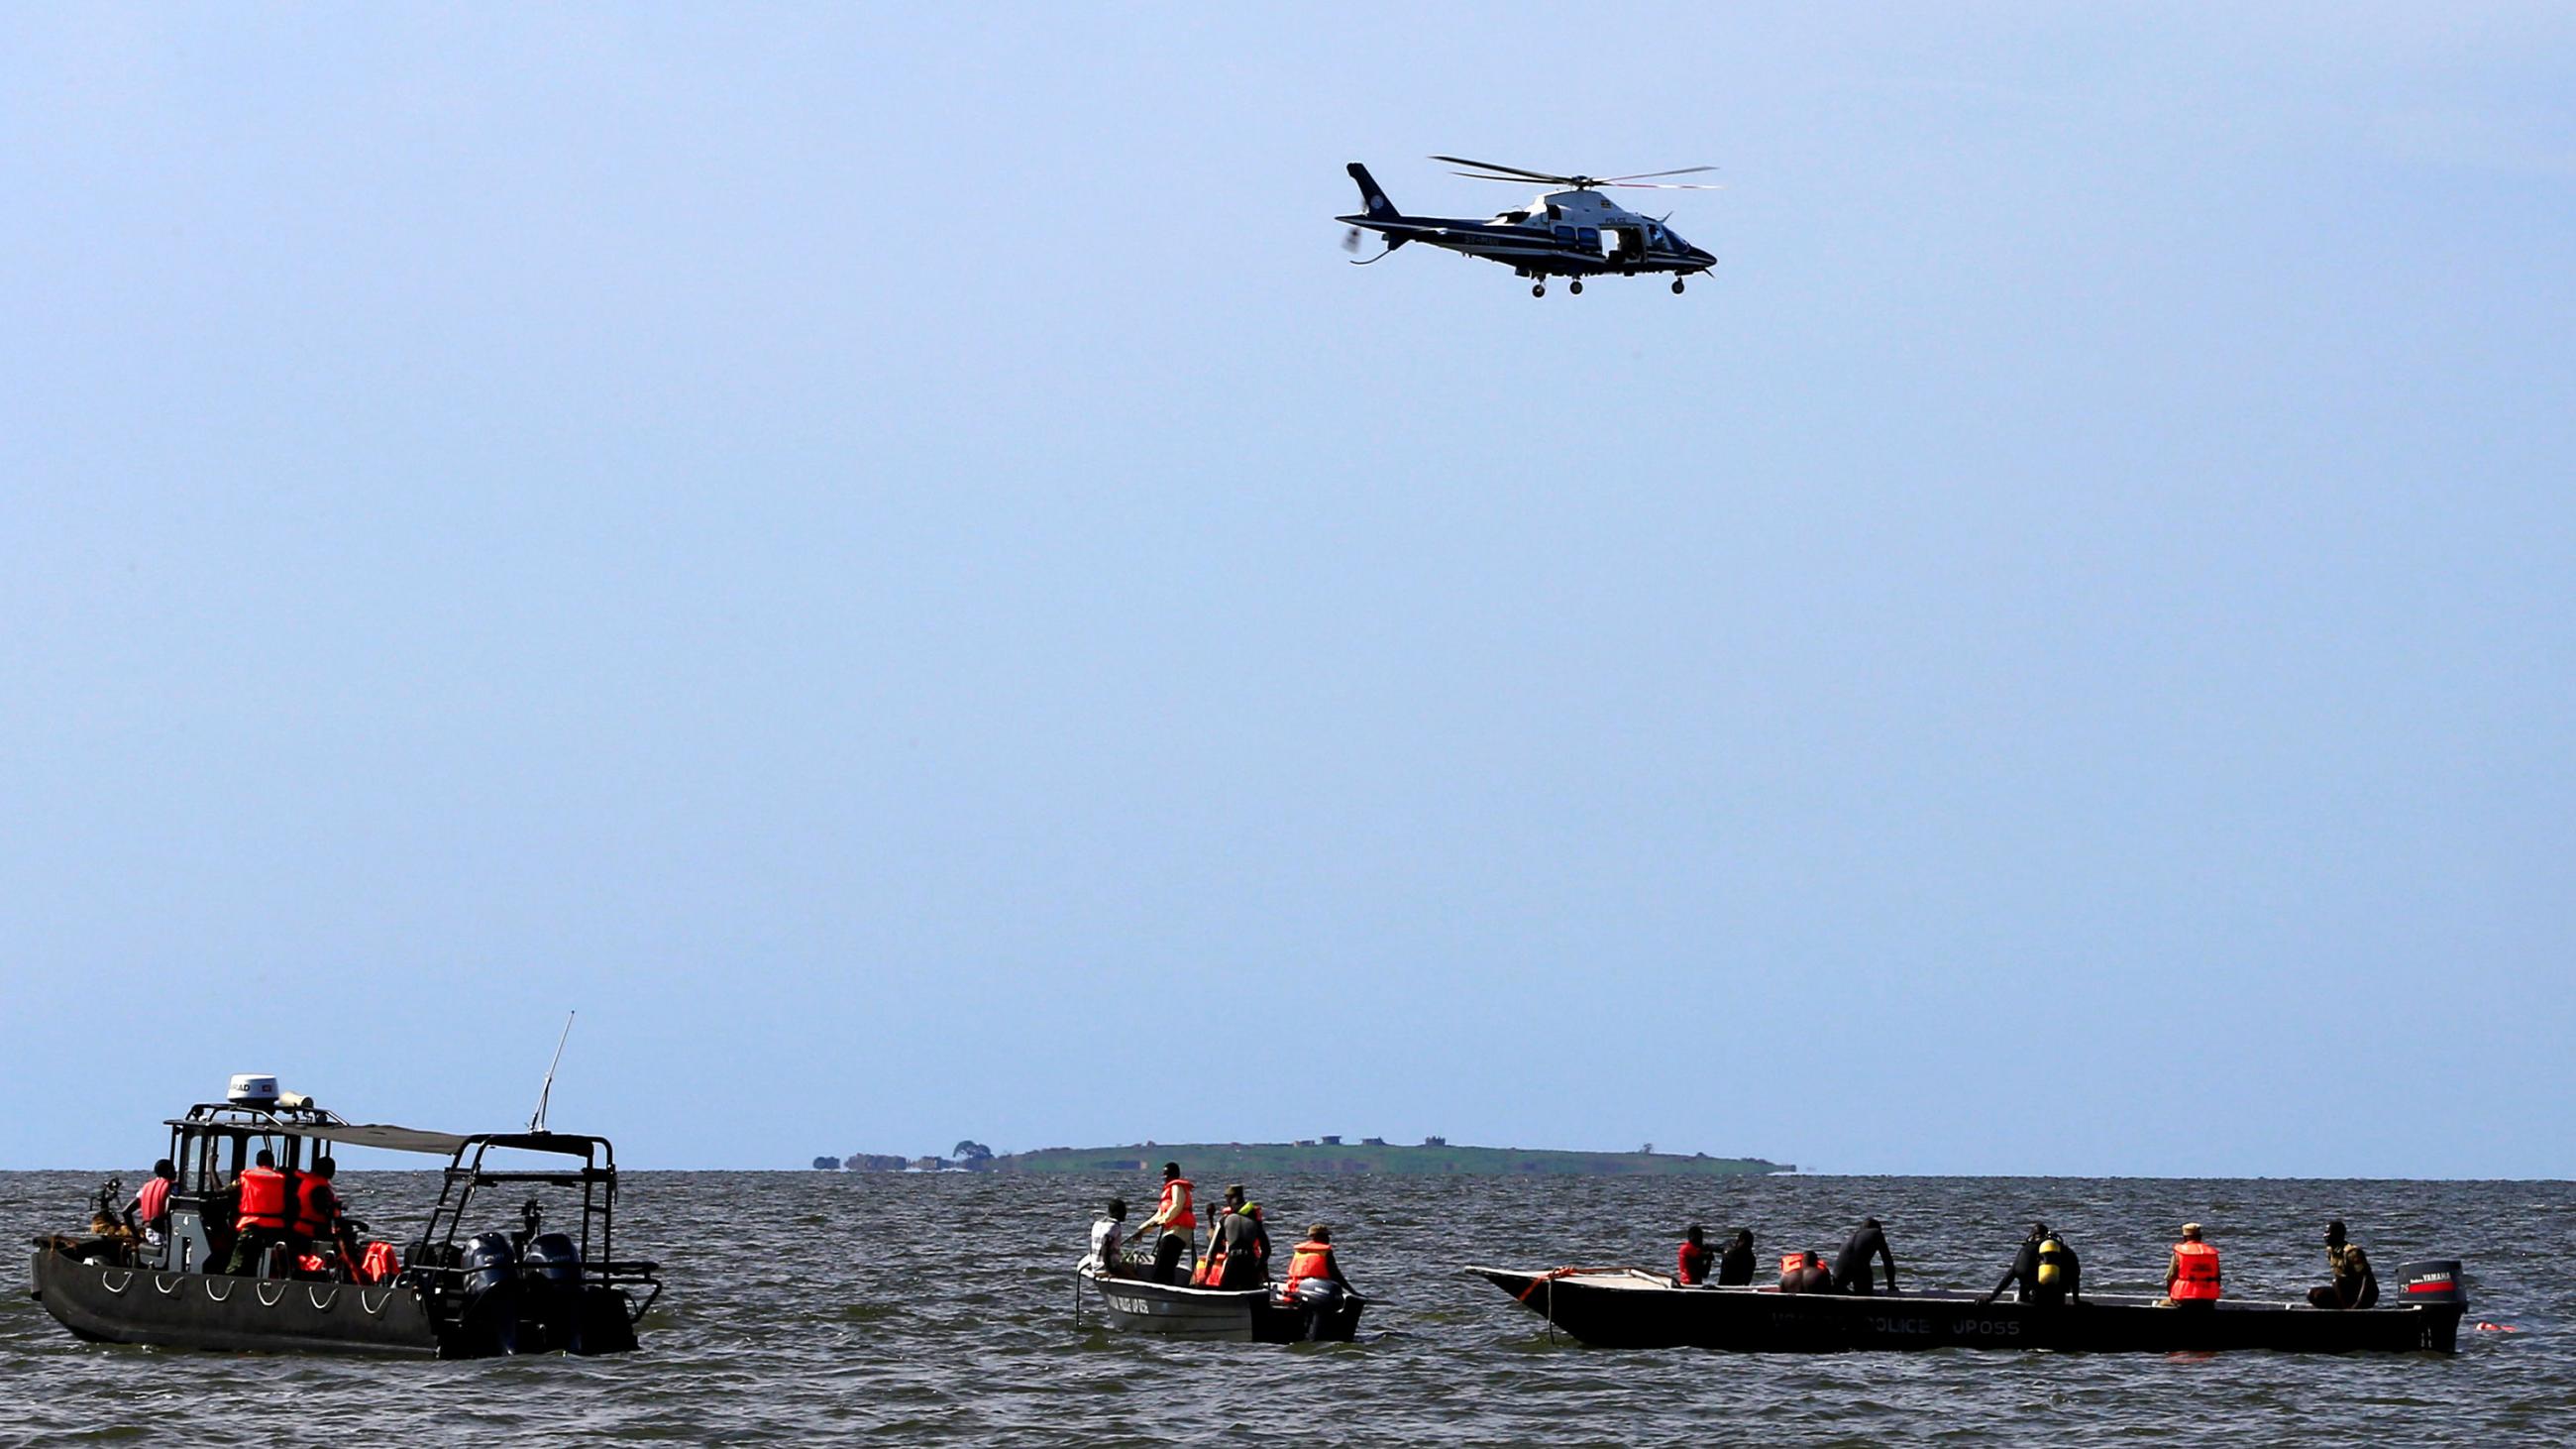 Rescue and recovery missions search for the bodies of dead passengers after a cruise boat capsized in Lake Victoria off Mukono district, Uganda November 25, 2018. Picture shows three motor boats in the water with people standing on their decks. One has a diver partially submerged hanging on to the side. A helicopter flies overhead. 